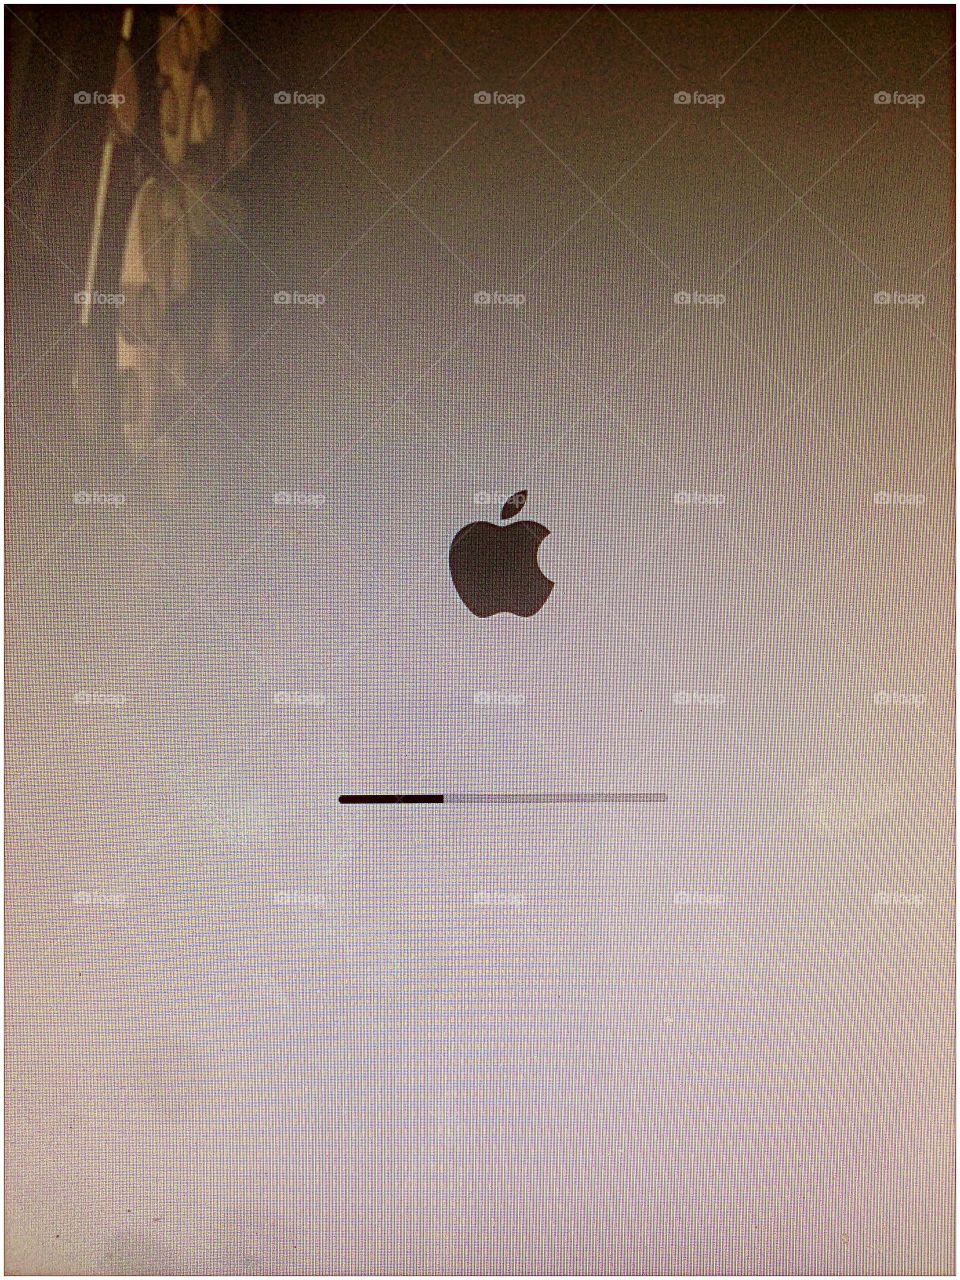 Loading macOS boot page